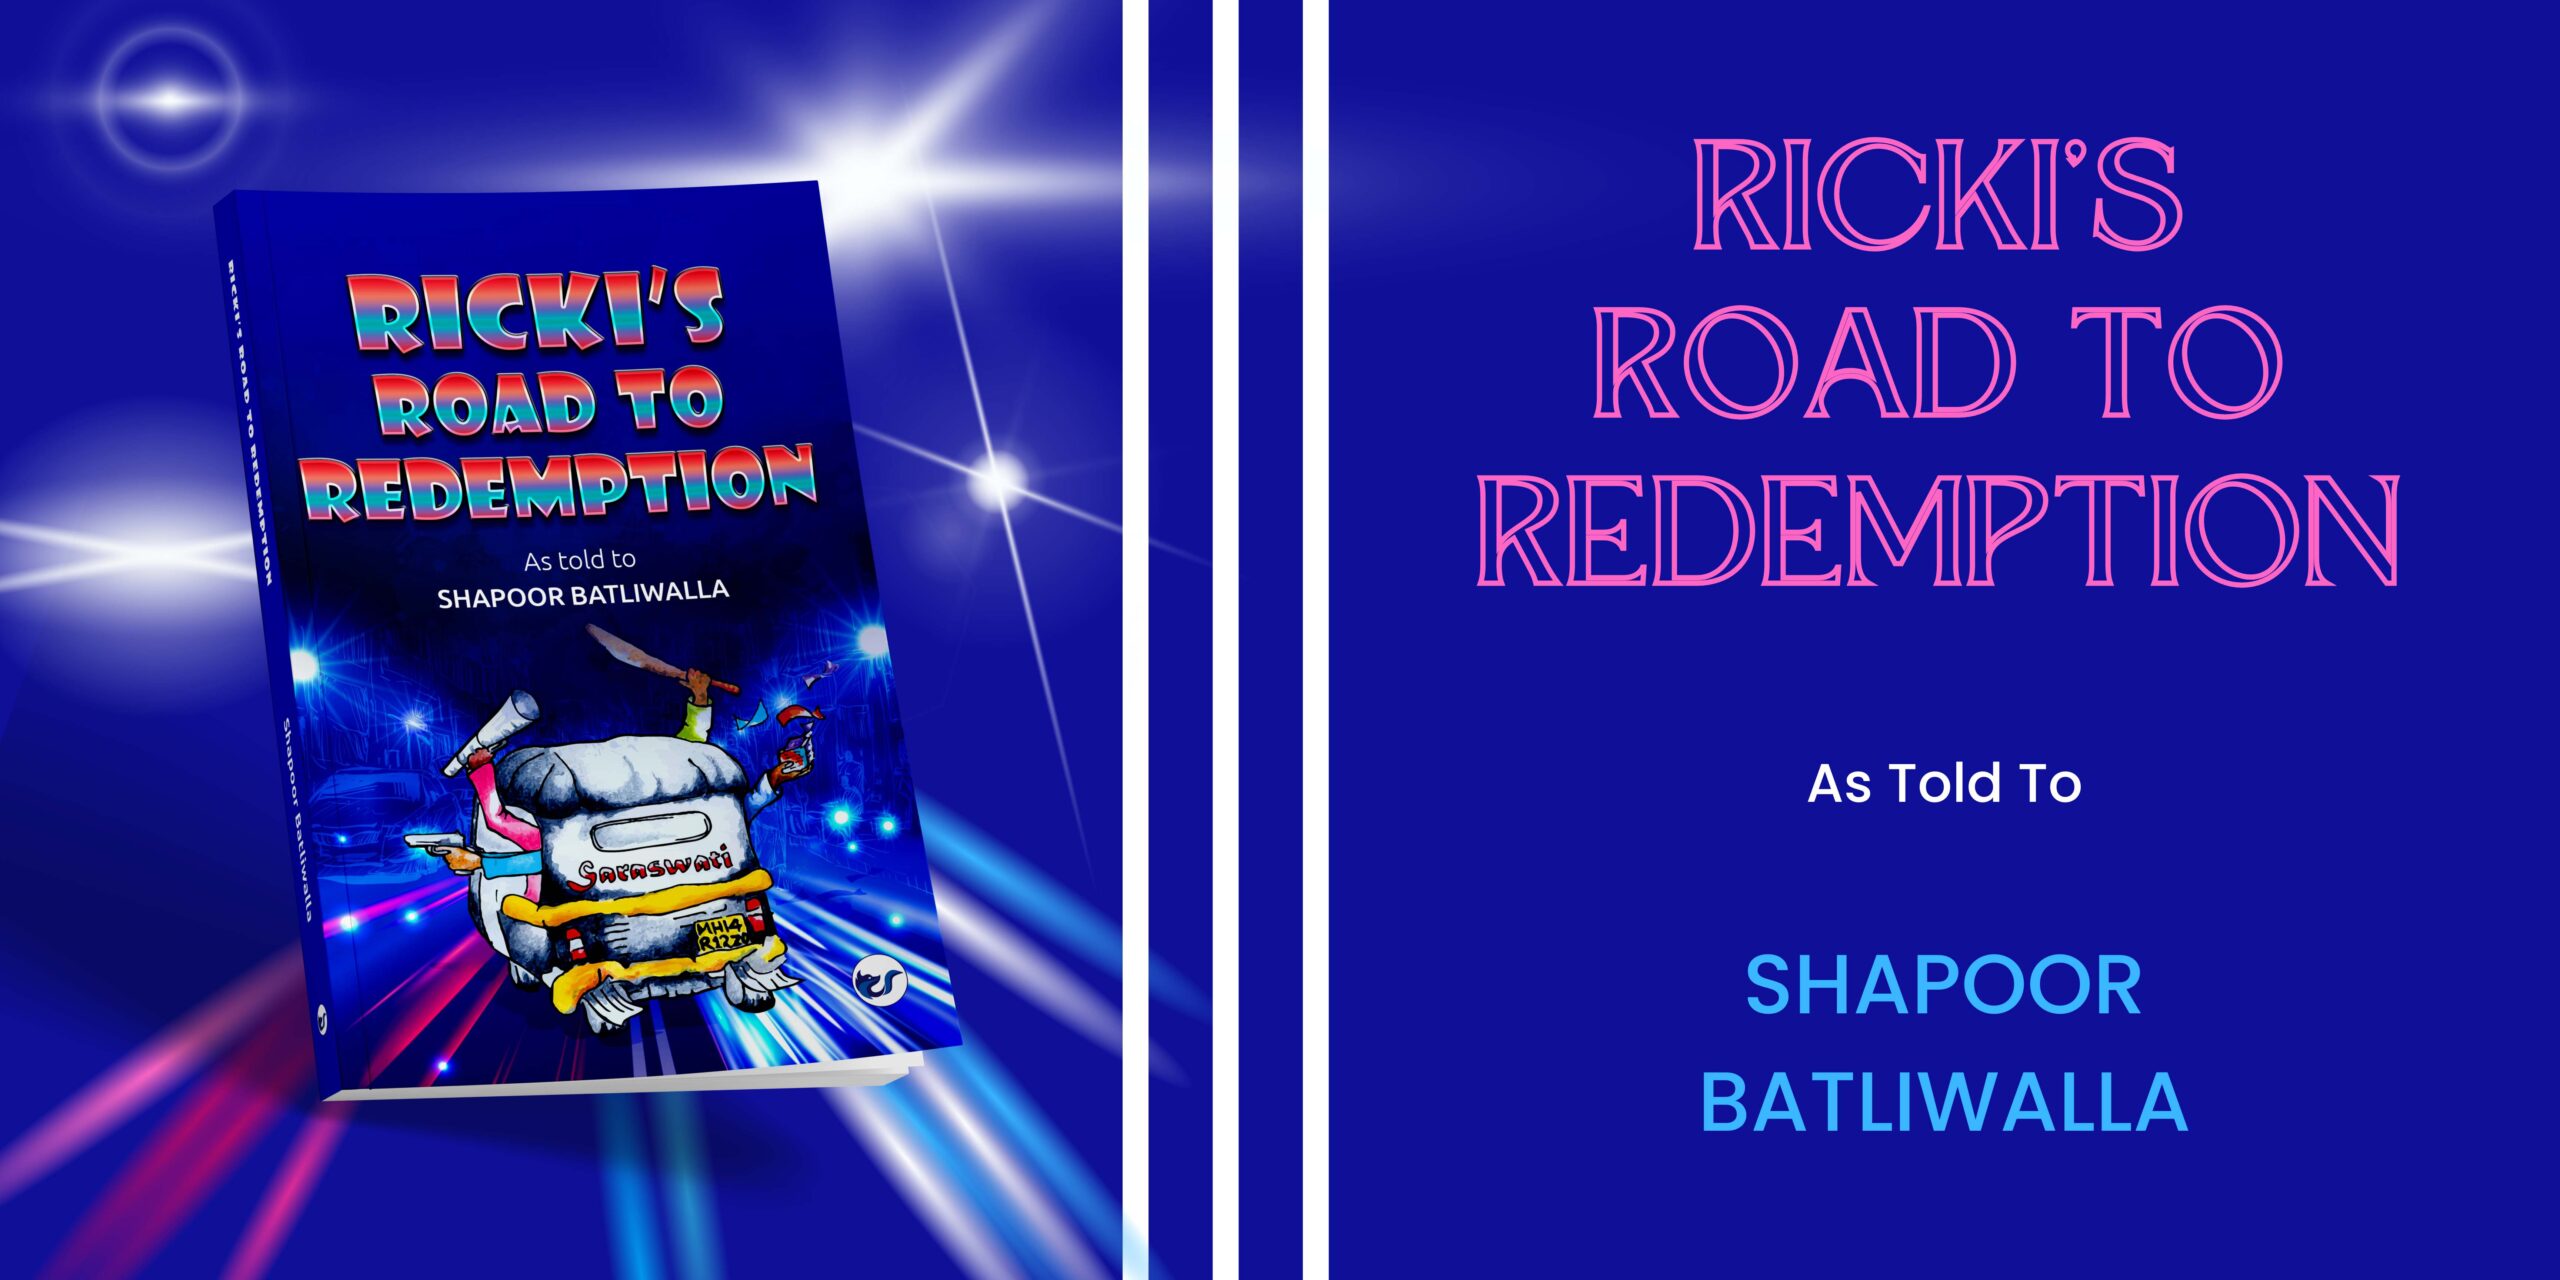 A BOLLYWOOD ADVENTURE IN RICKI’S ROAD TO REDEMPTION